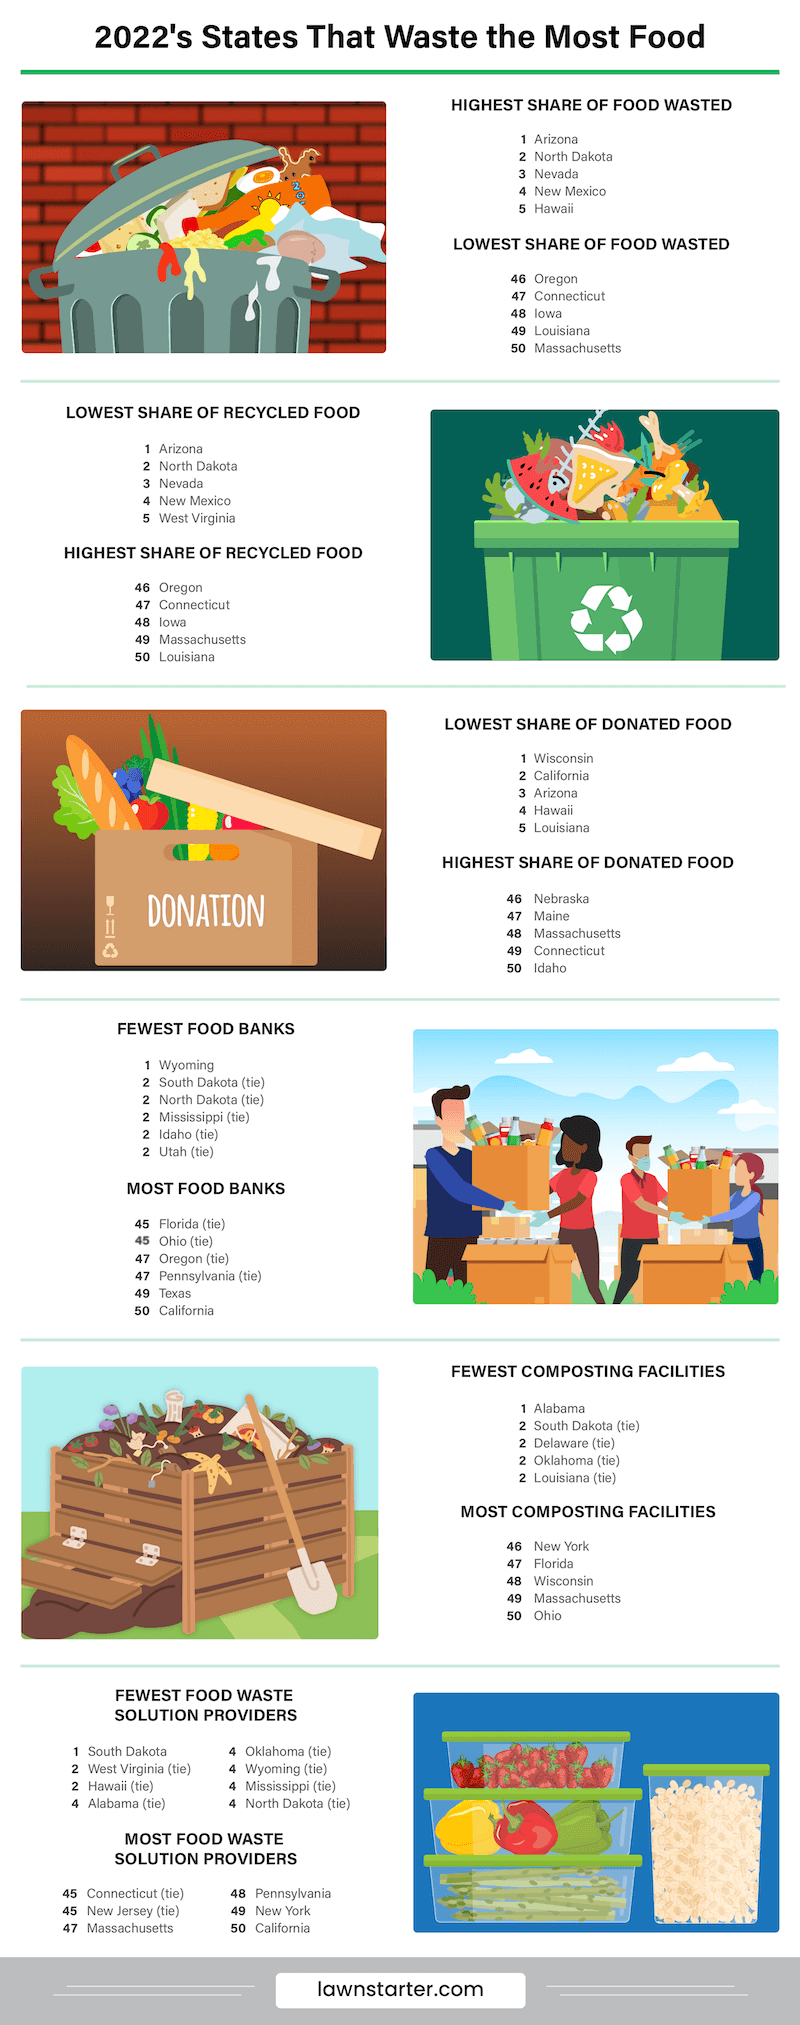 Infographic showing the states that waste the most and least food, a ranking based on share of wasted, recycled, and donated food, the number of food banks, composting facilities, and more